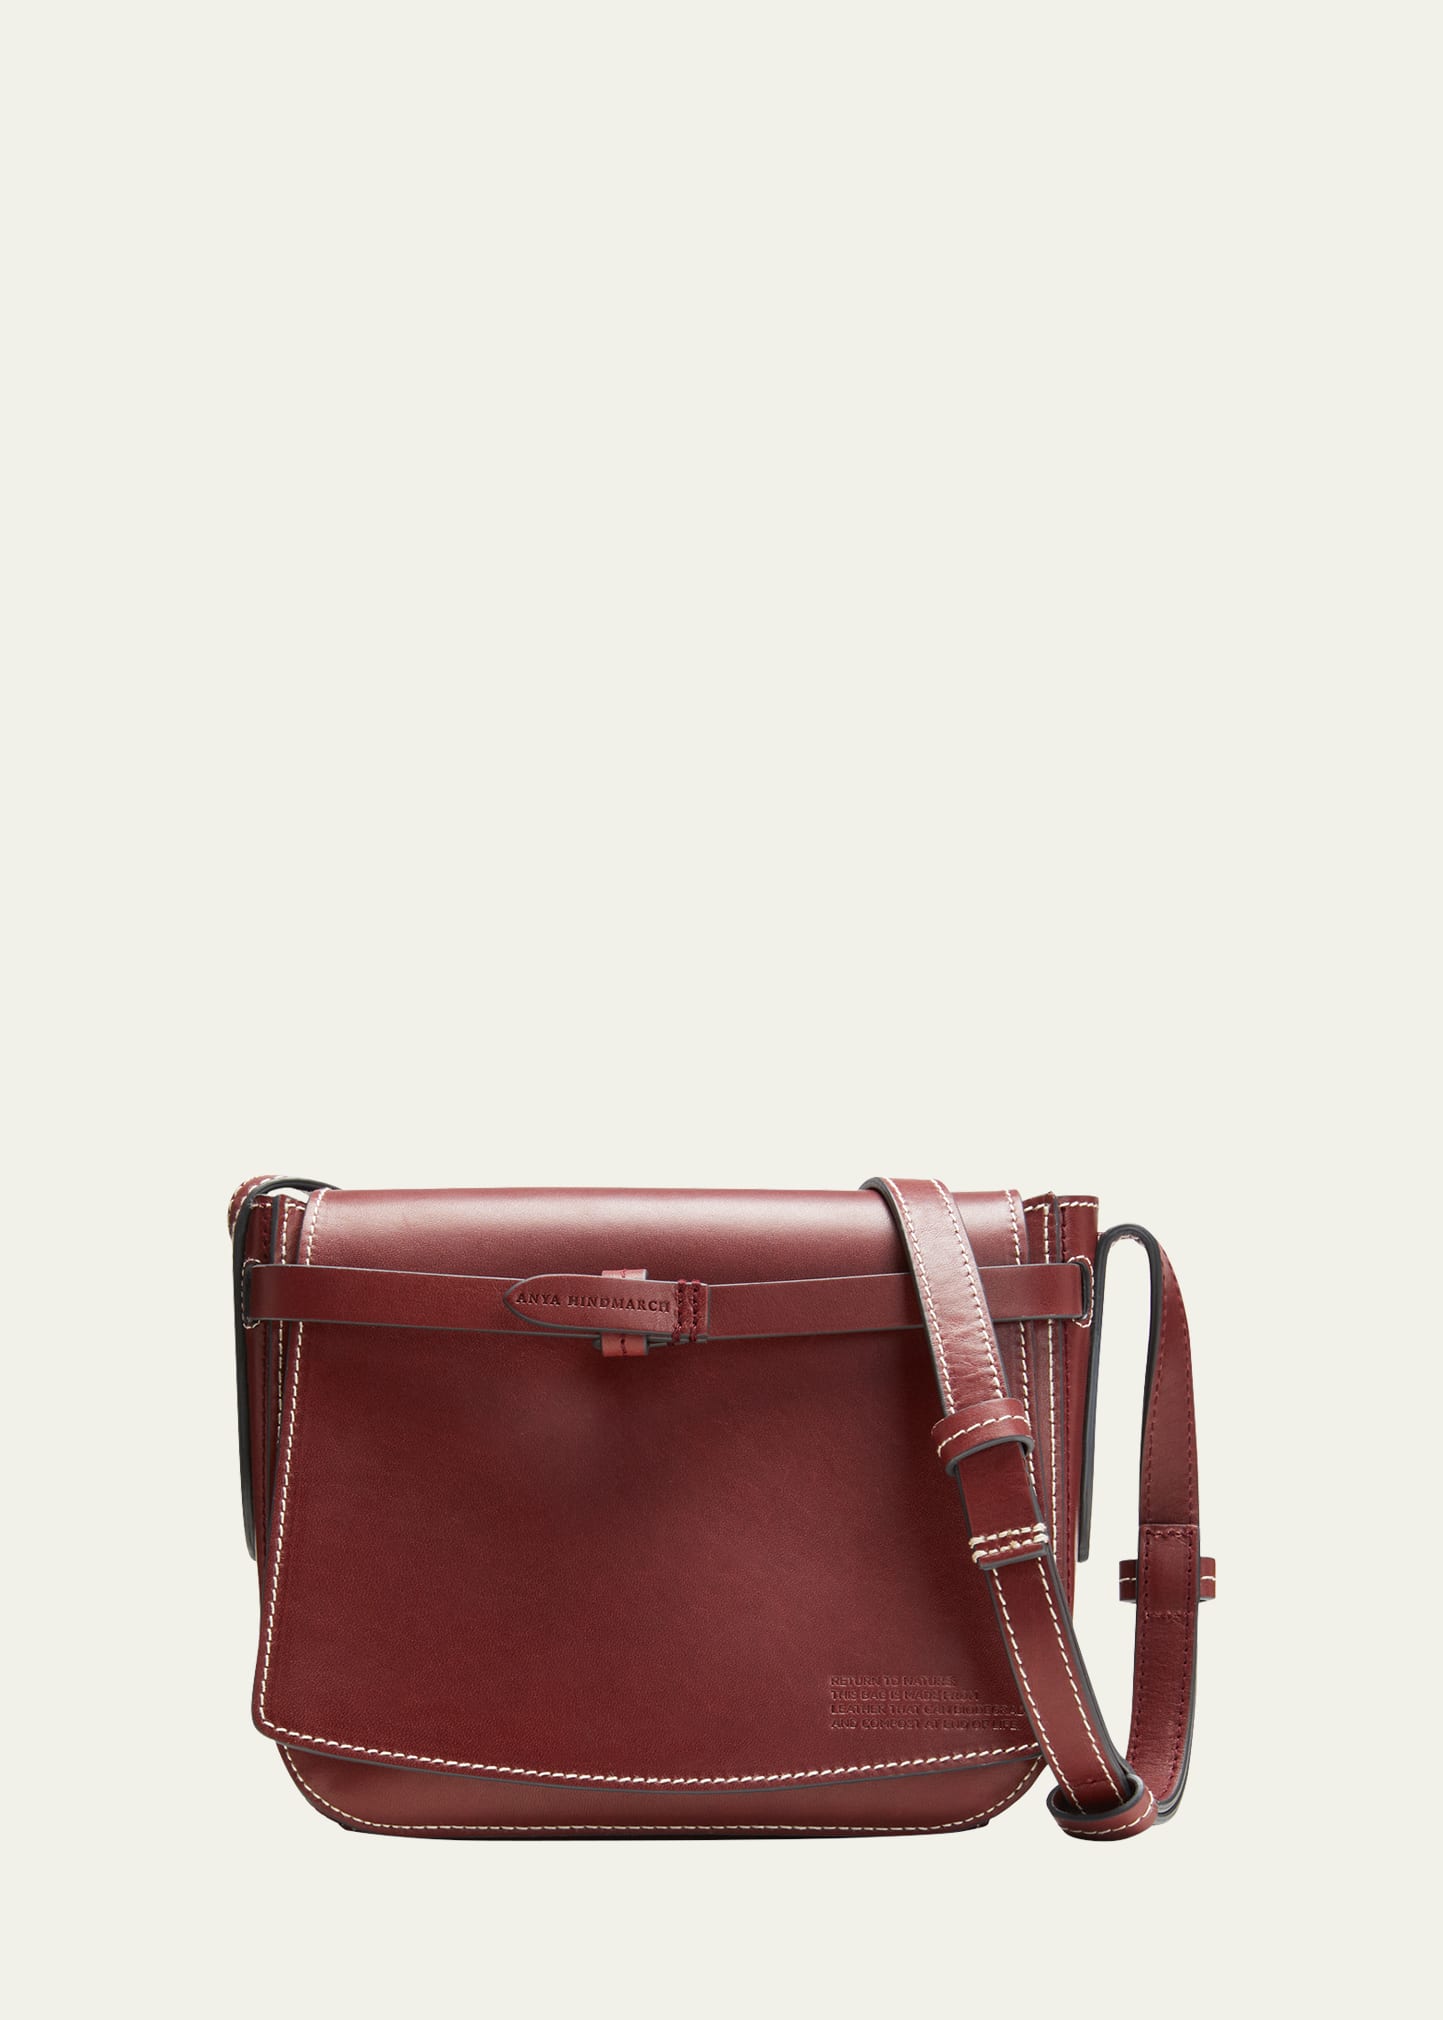 Anya Hindmarch Compostable Leather Shoulder Bag In Rosewood